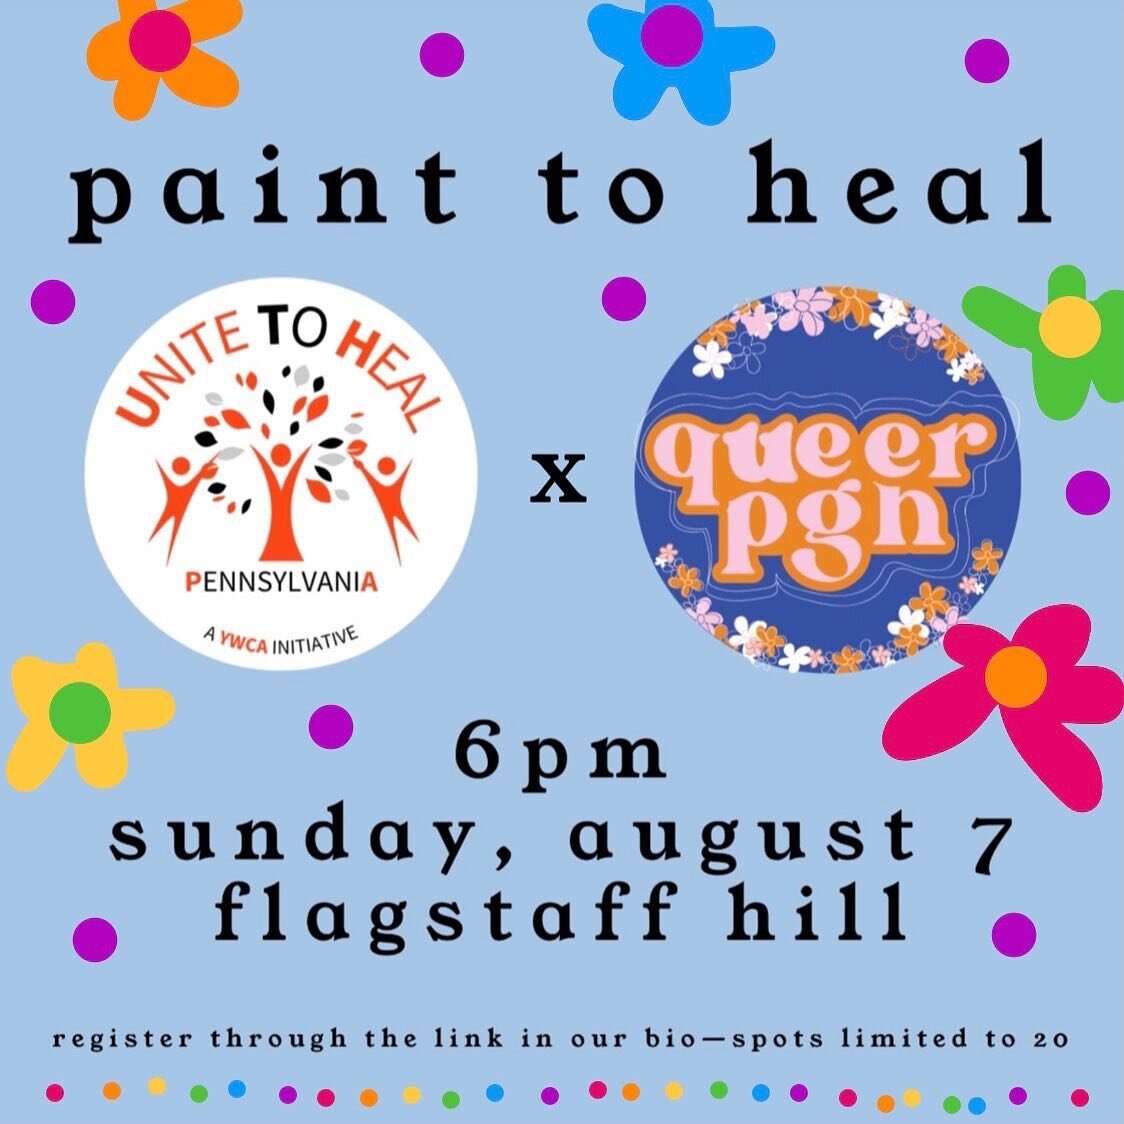 We&rsquo;re so excited to partner with Unite to Heal PA, a YWCA initiative, to bring you Paint to Heal, a night of art, music + conversation. Free paint with us as we discuss what it means to heal from oppression at the intersections of our identitie